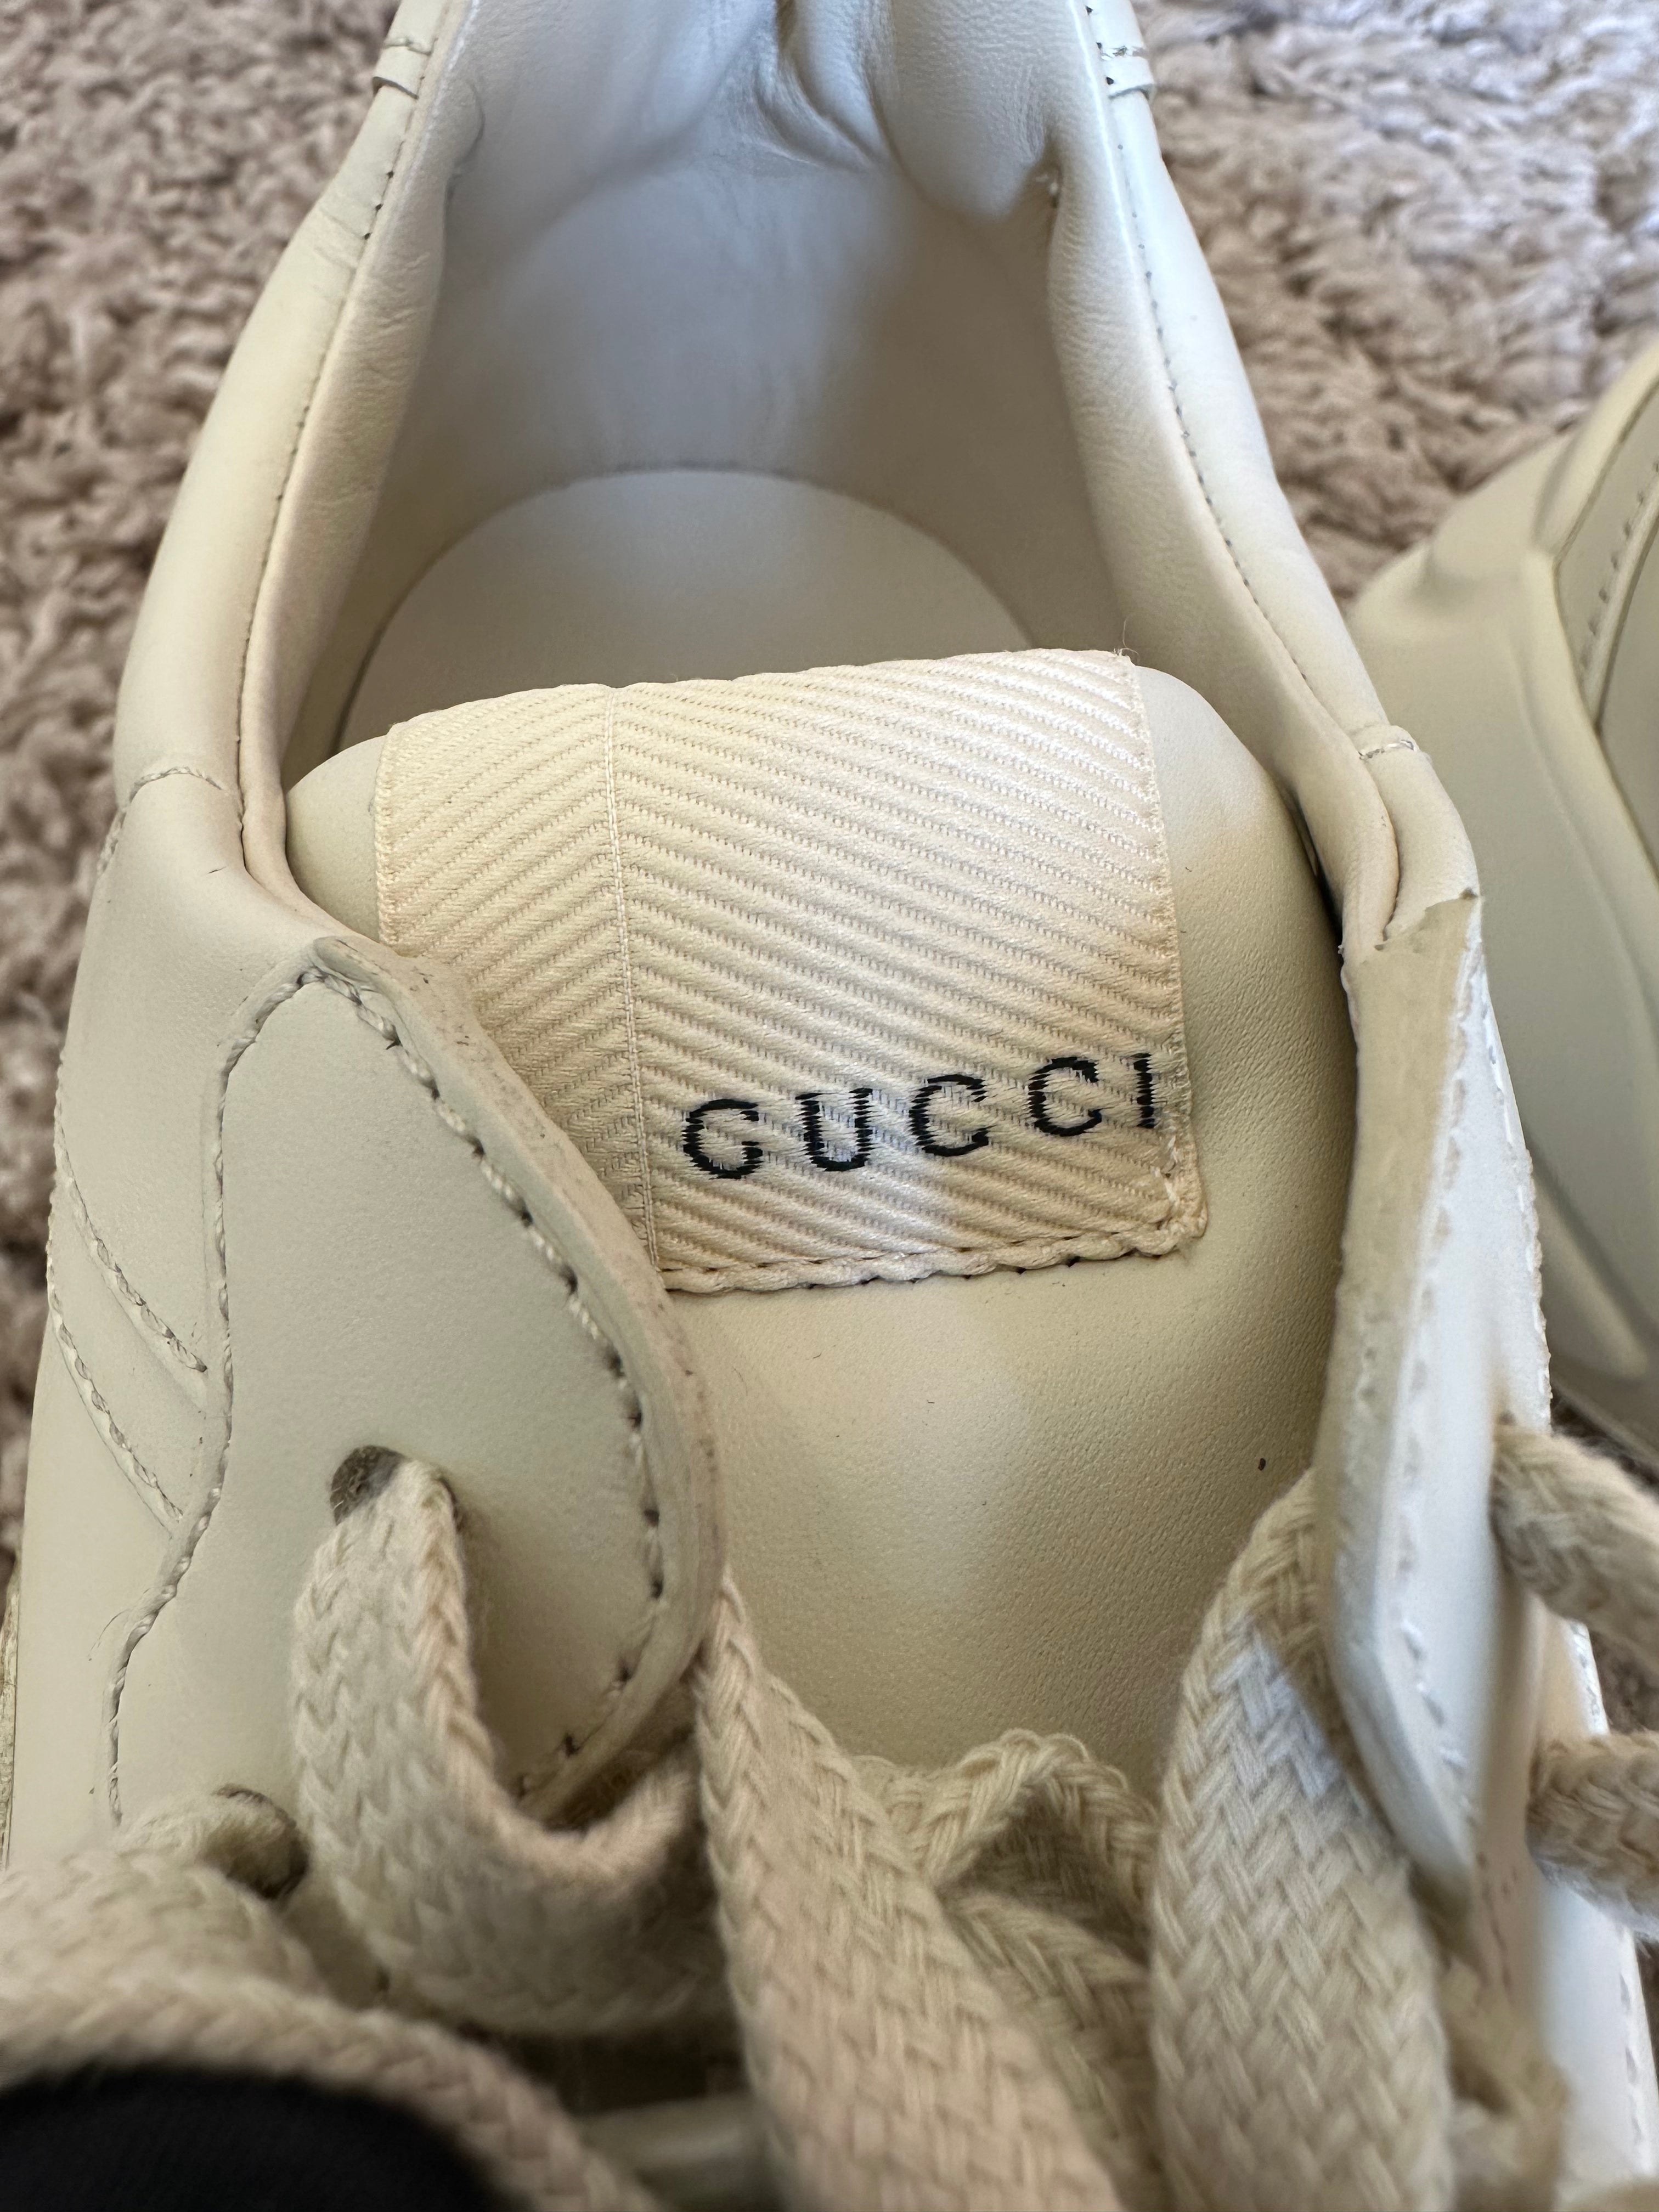 Gucci Rython Sneakers *Brand New* (Mens UK6)